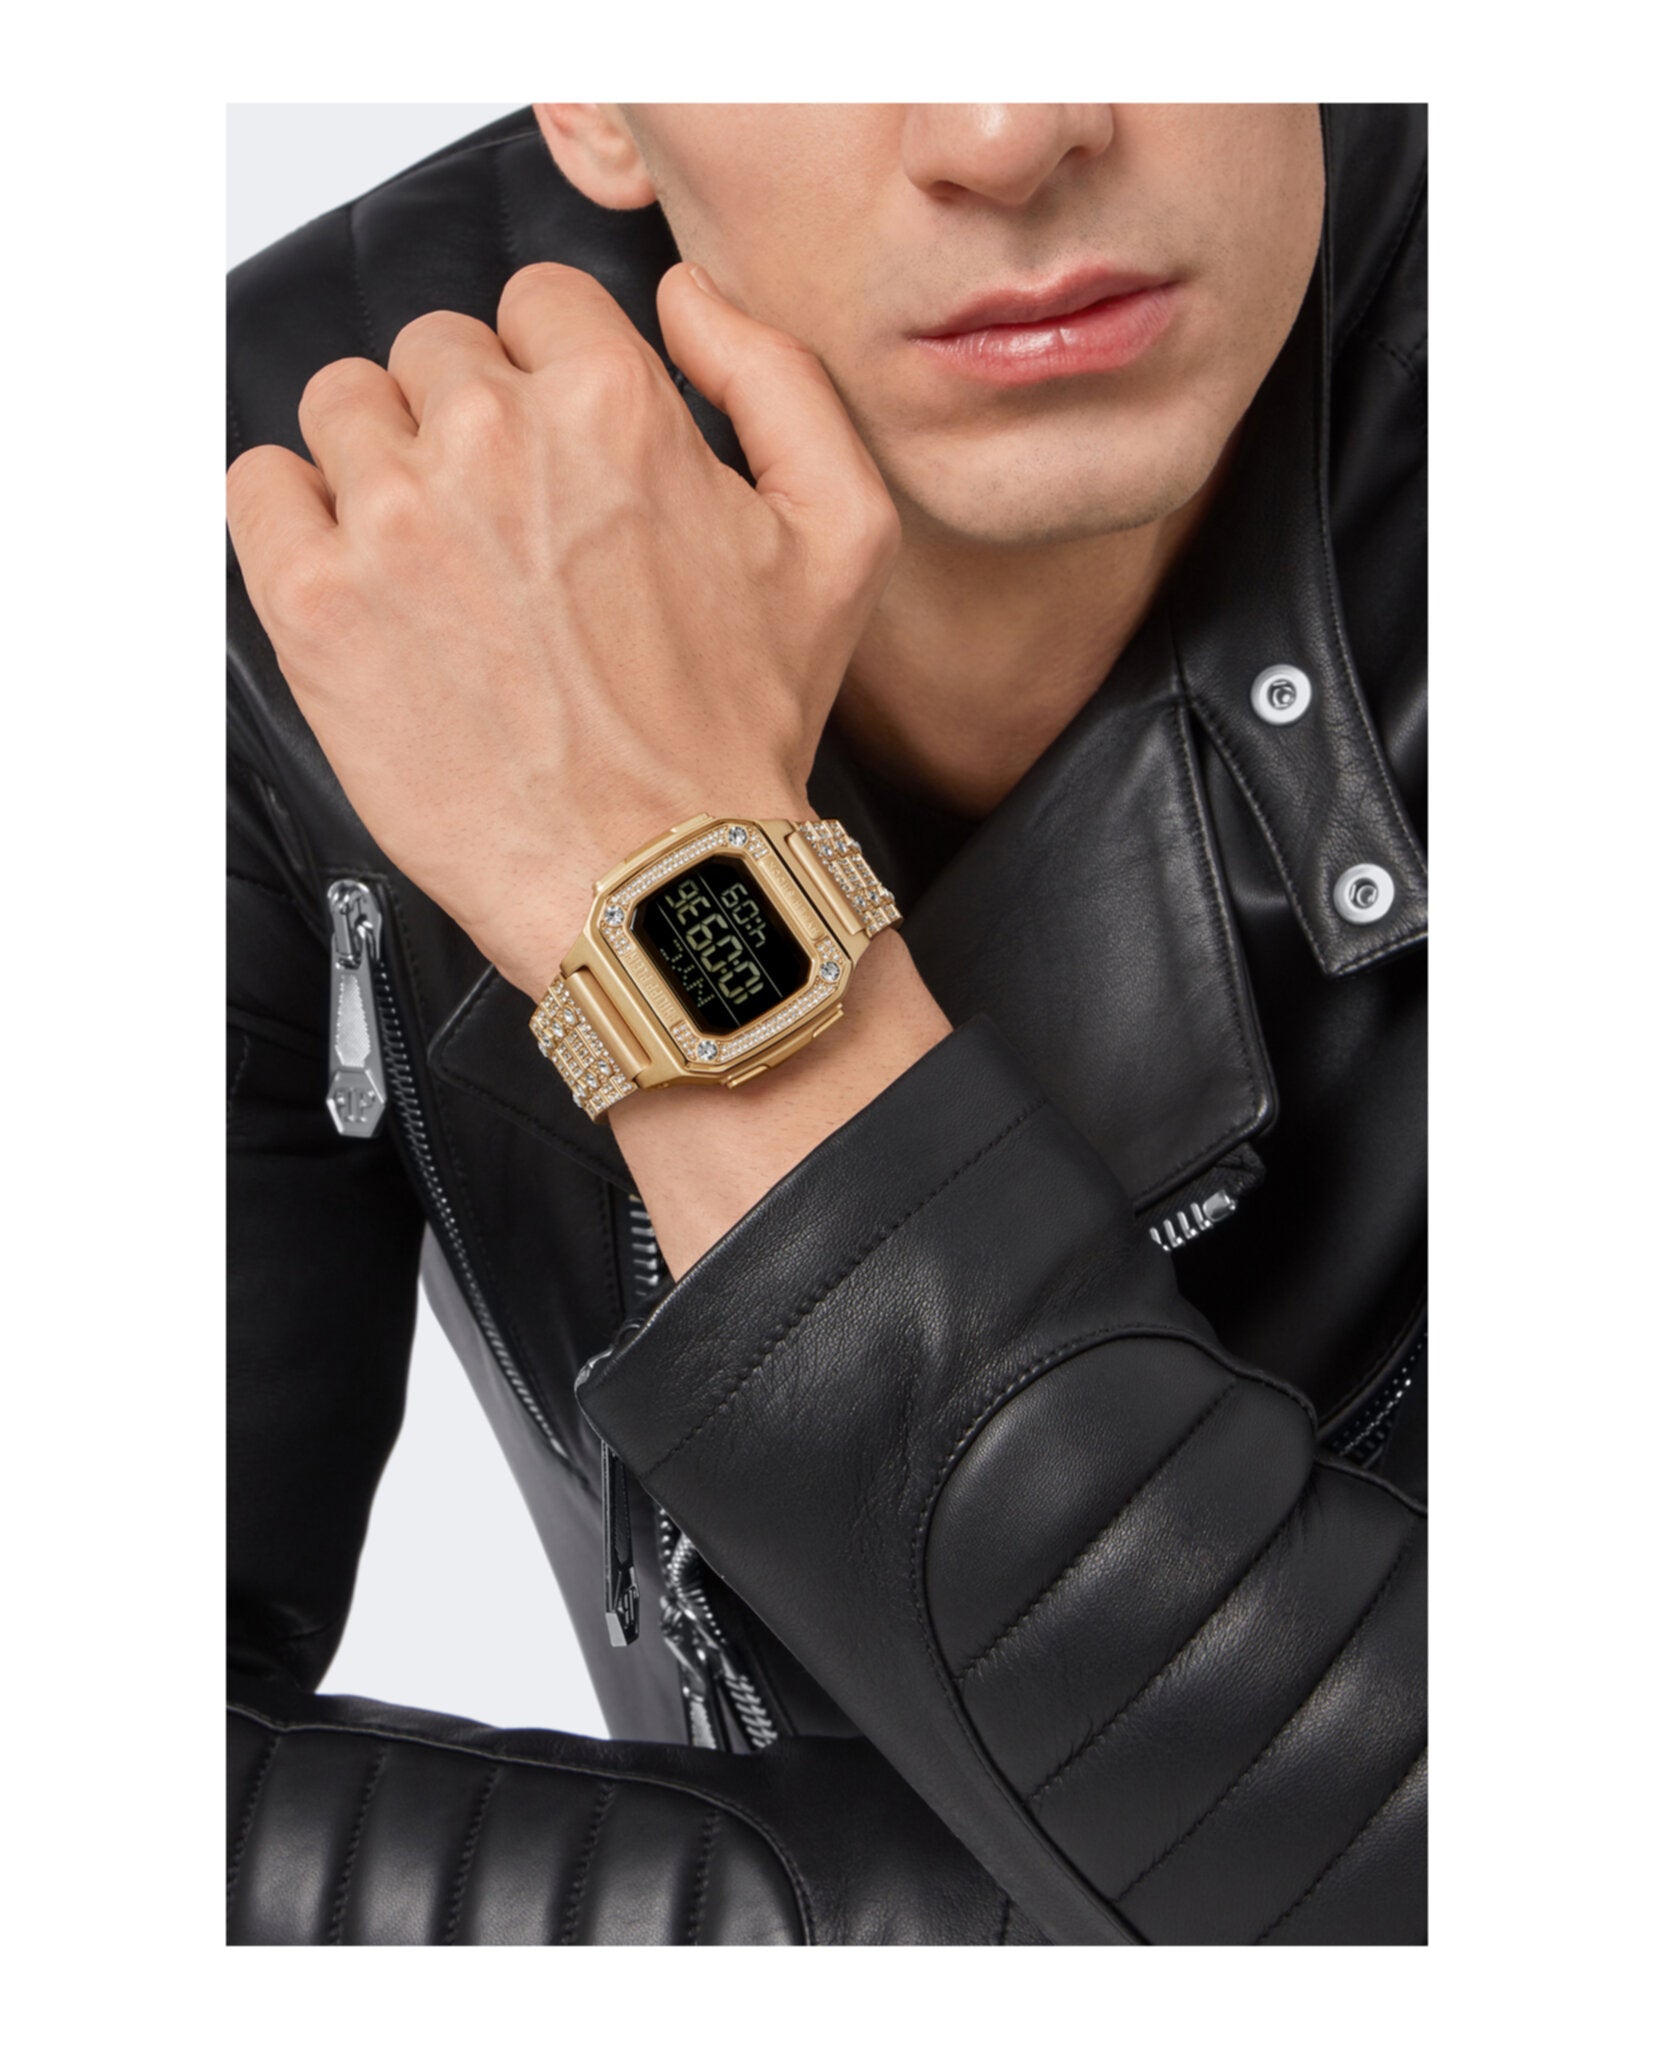 Philipp Plein Mens Hyper $hock Watches | MadaLuxe Time – Madaluxe Time